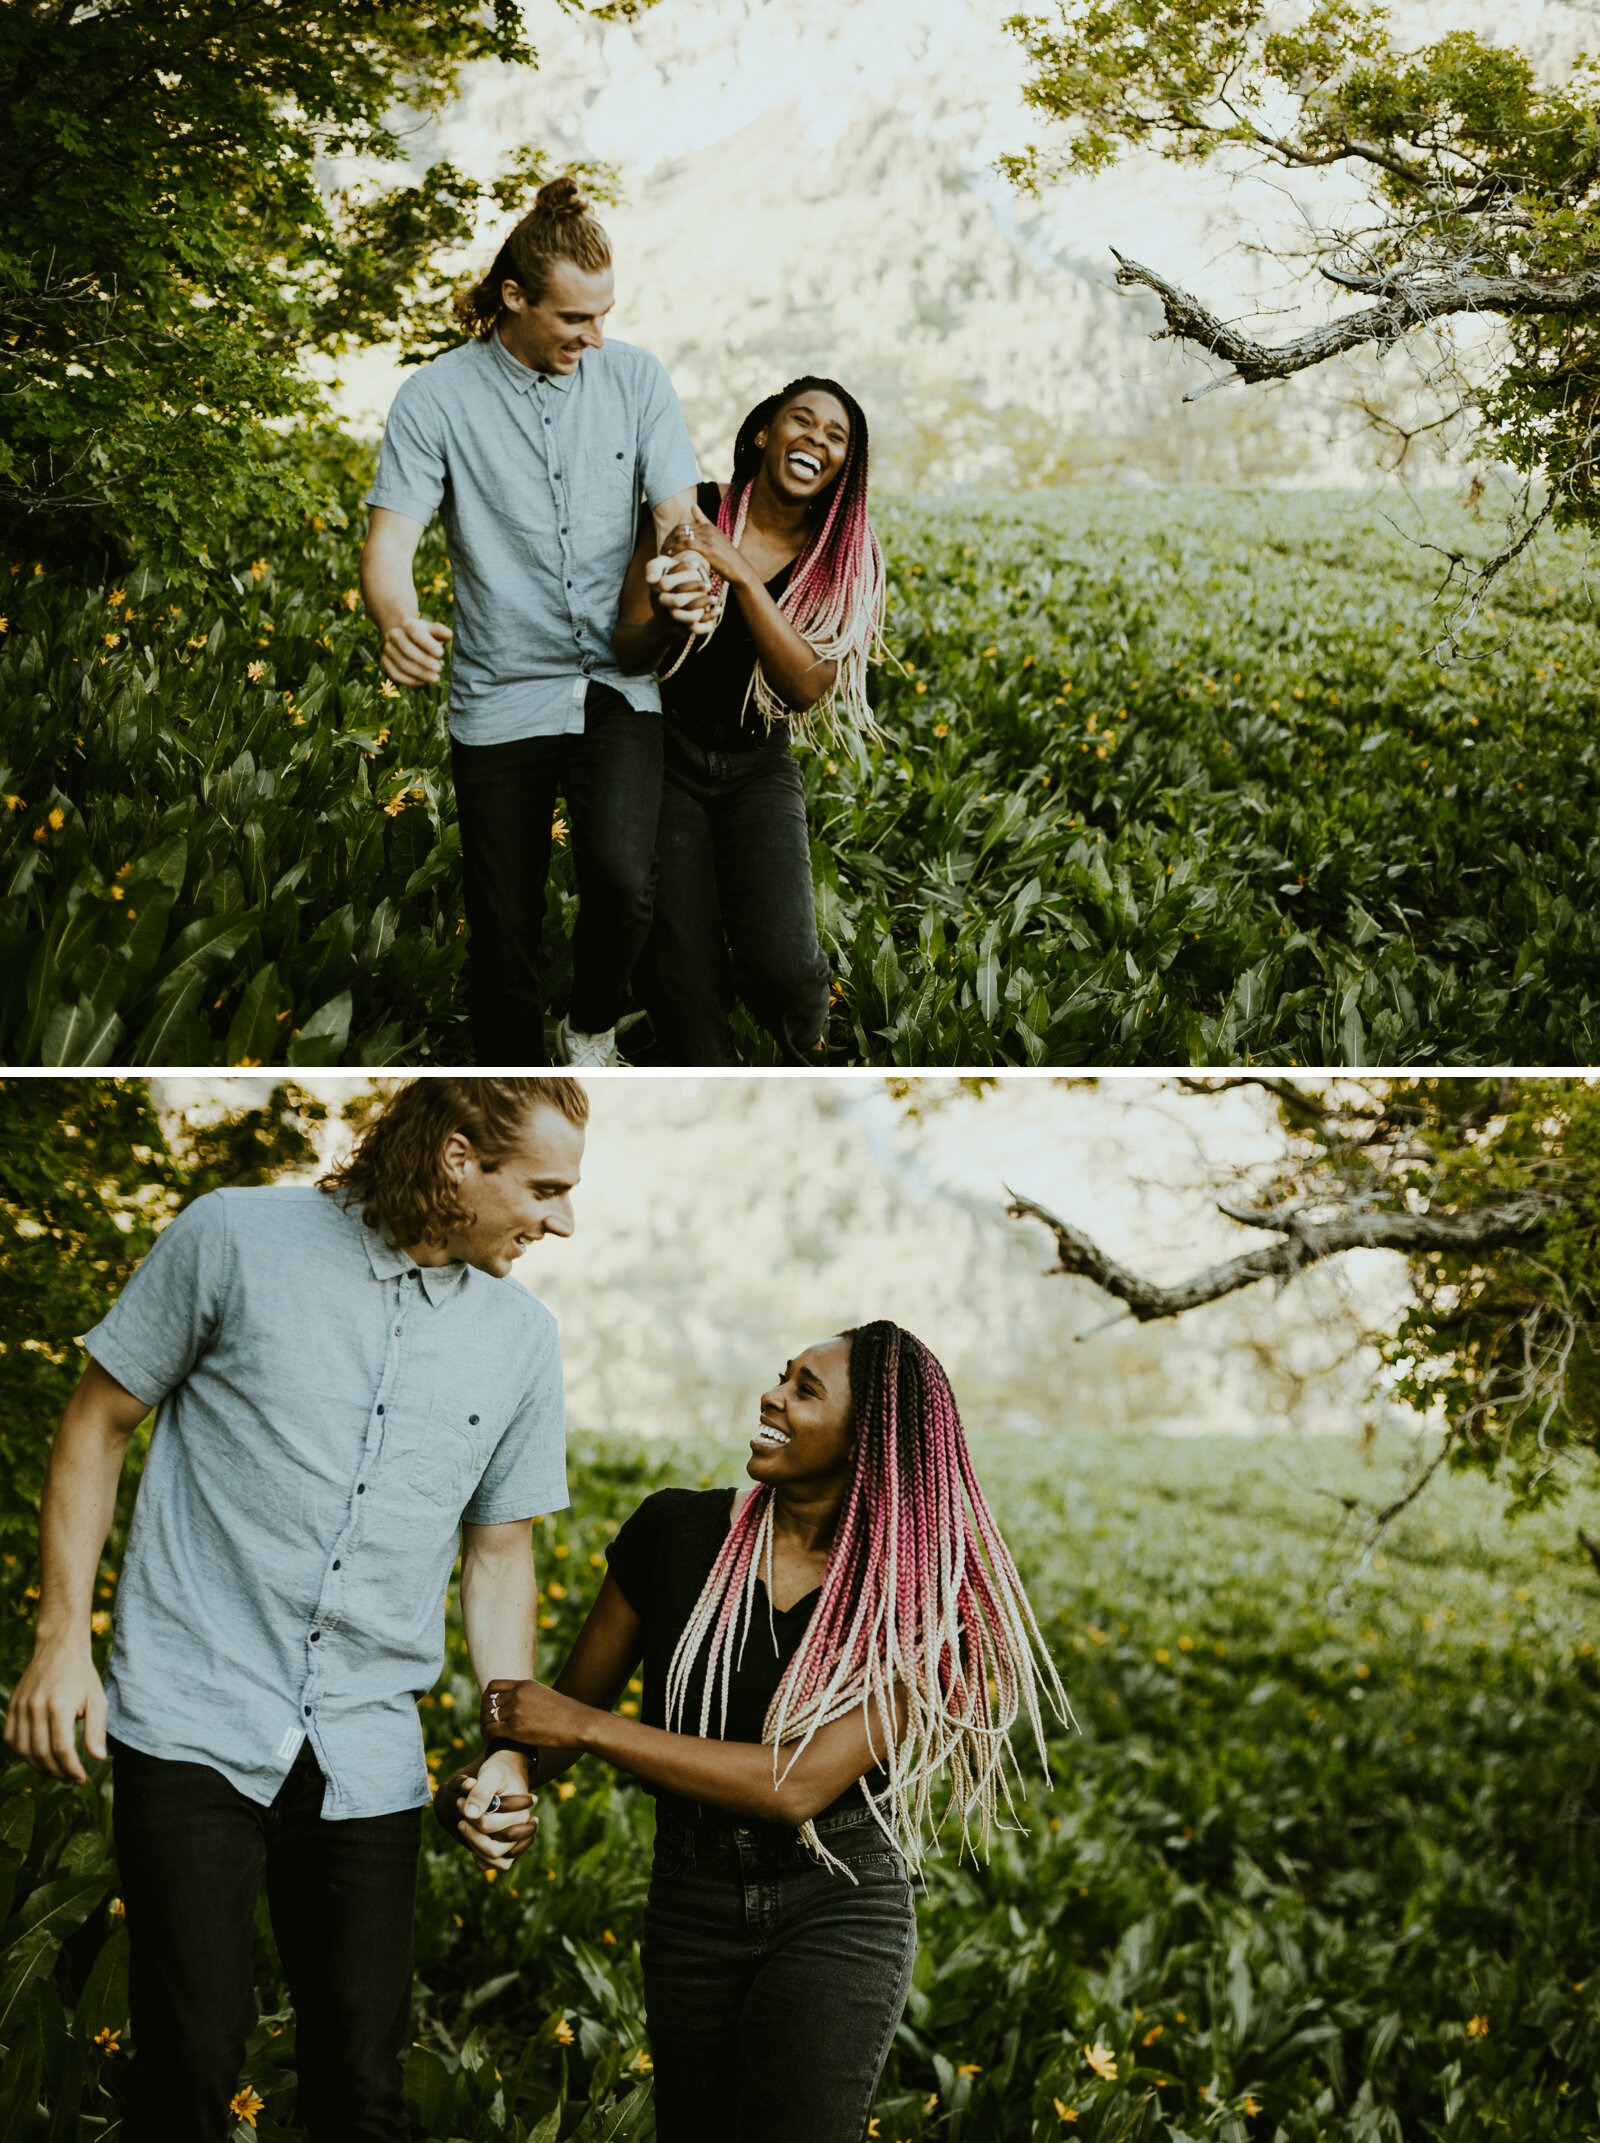 Couple walking through a field of flowers on a mountain in provo utah woman has pink hair and man has a blue shirt.jpg